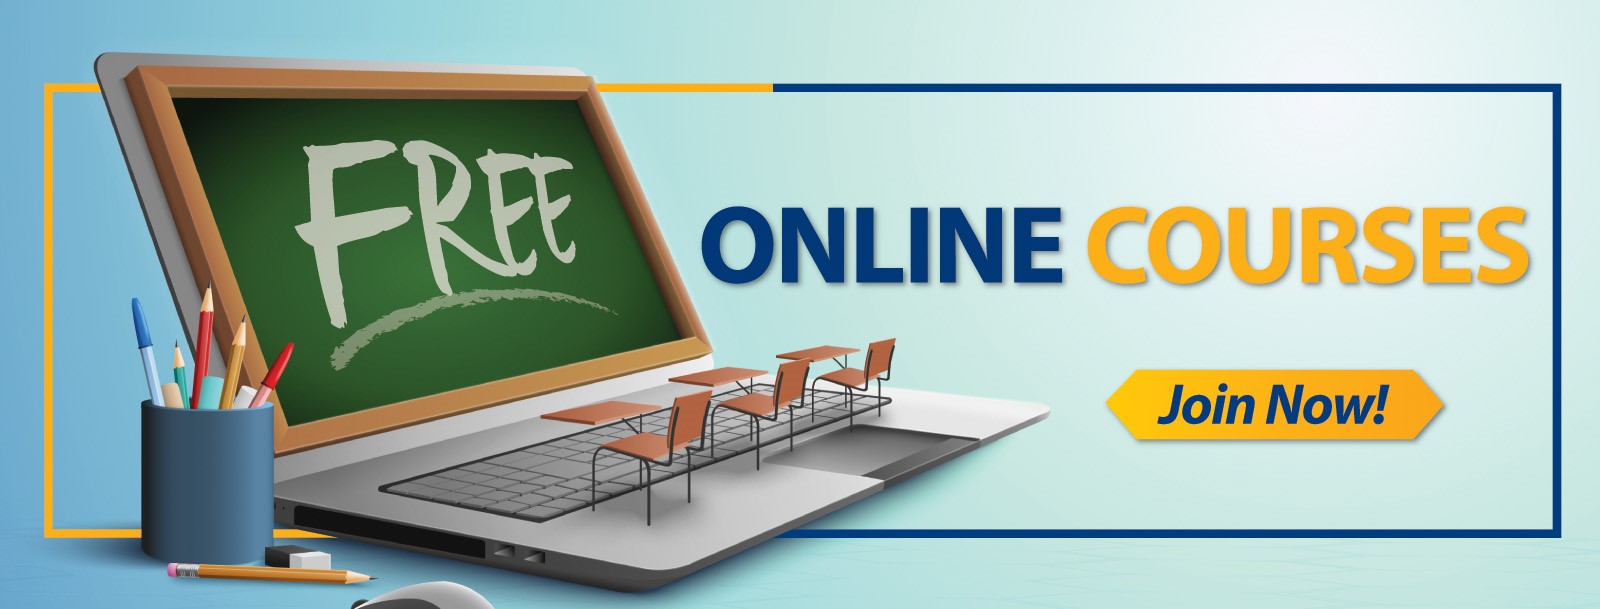 Free Online Courses